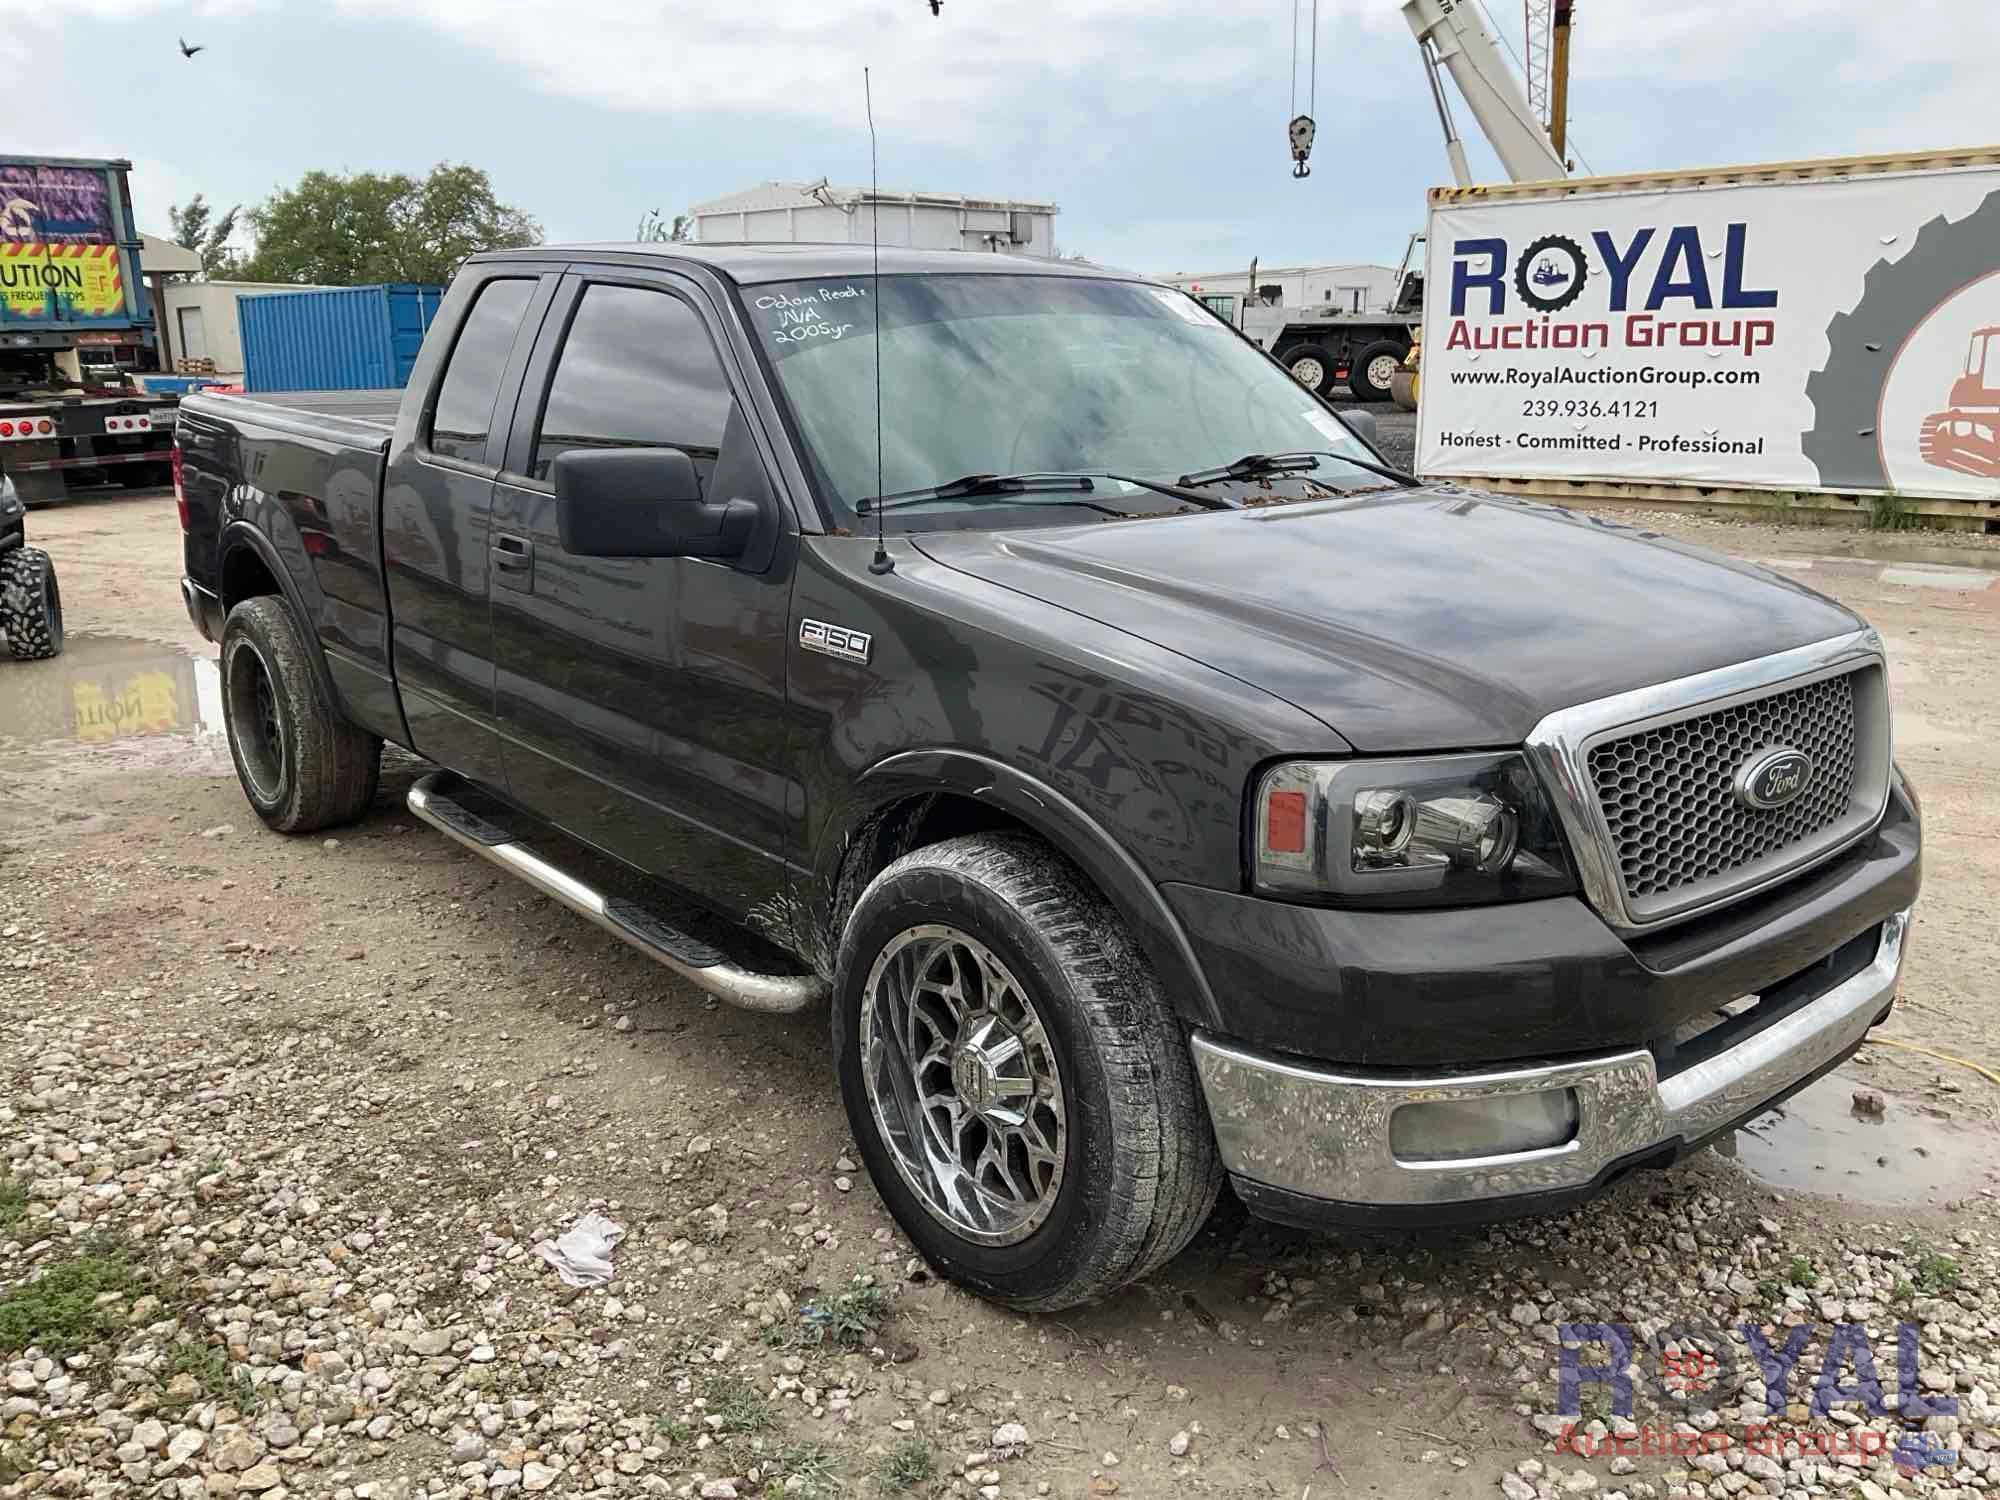 2005 Ford F-150 Lariat Ext Cab Pickup Truck